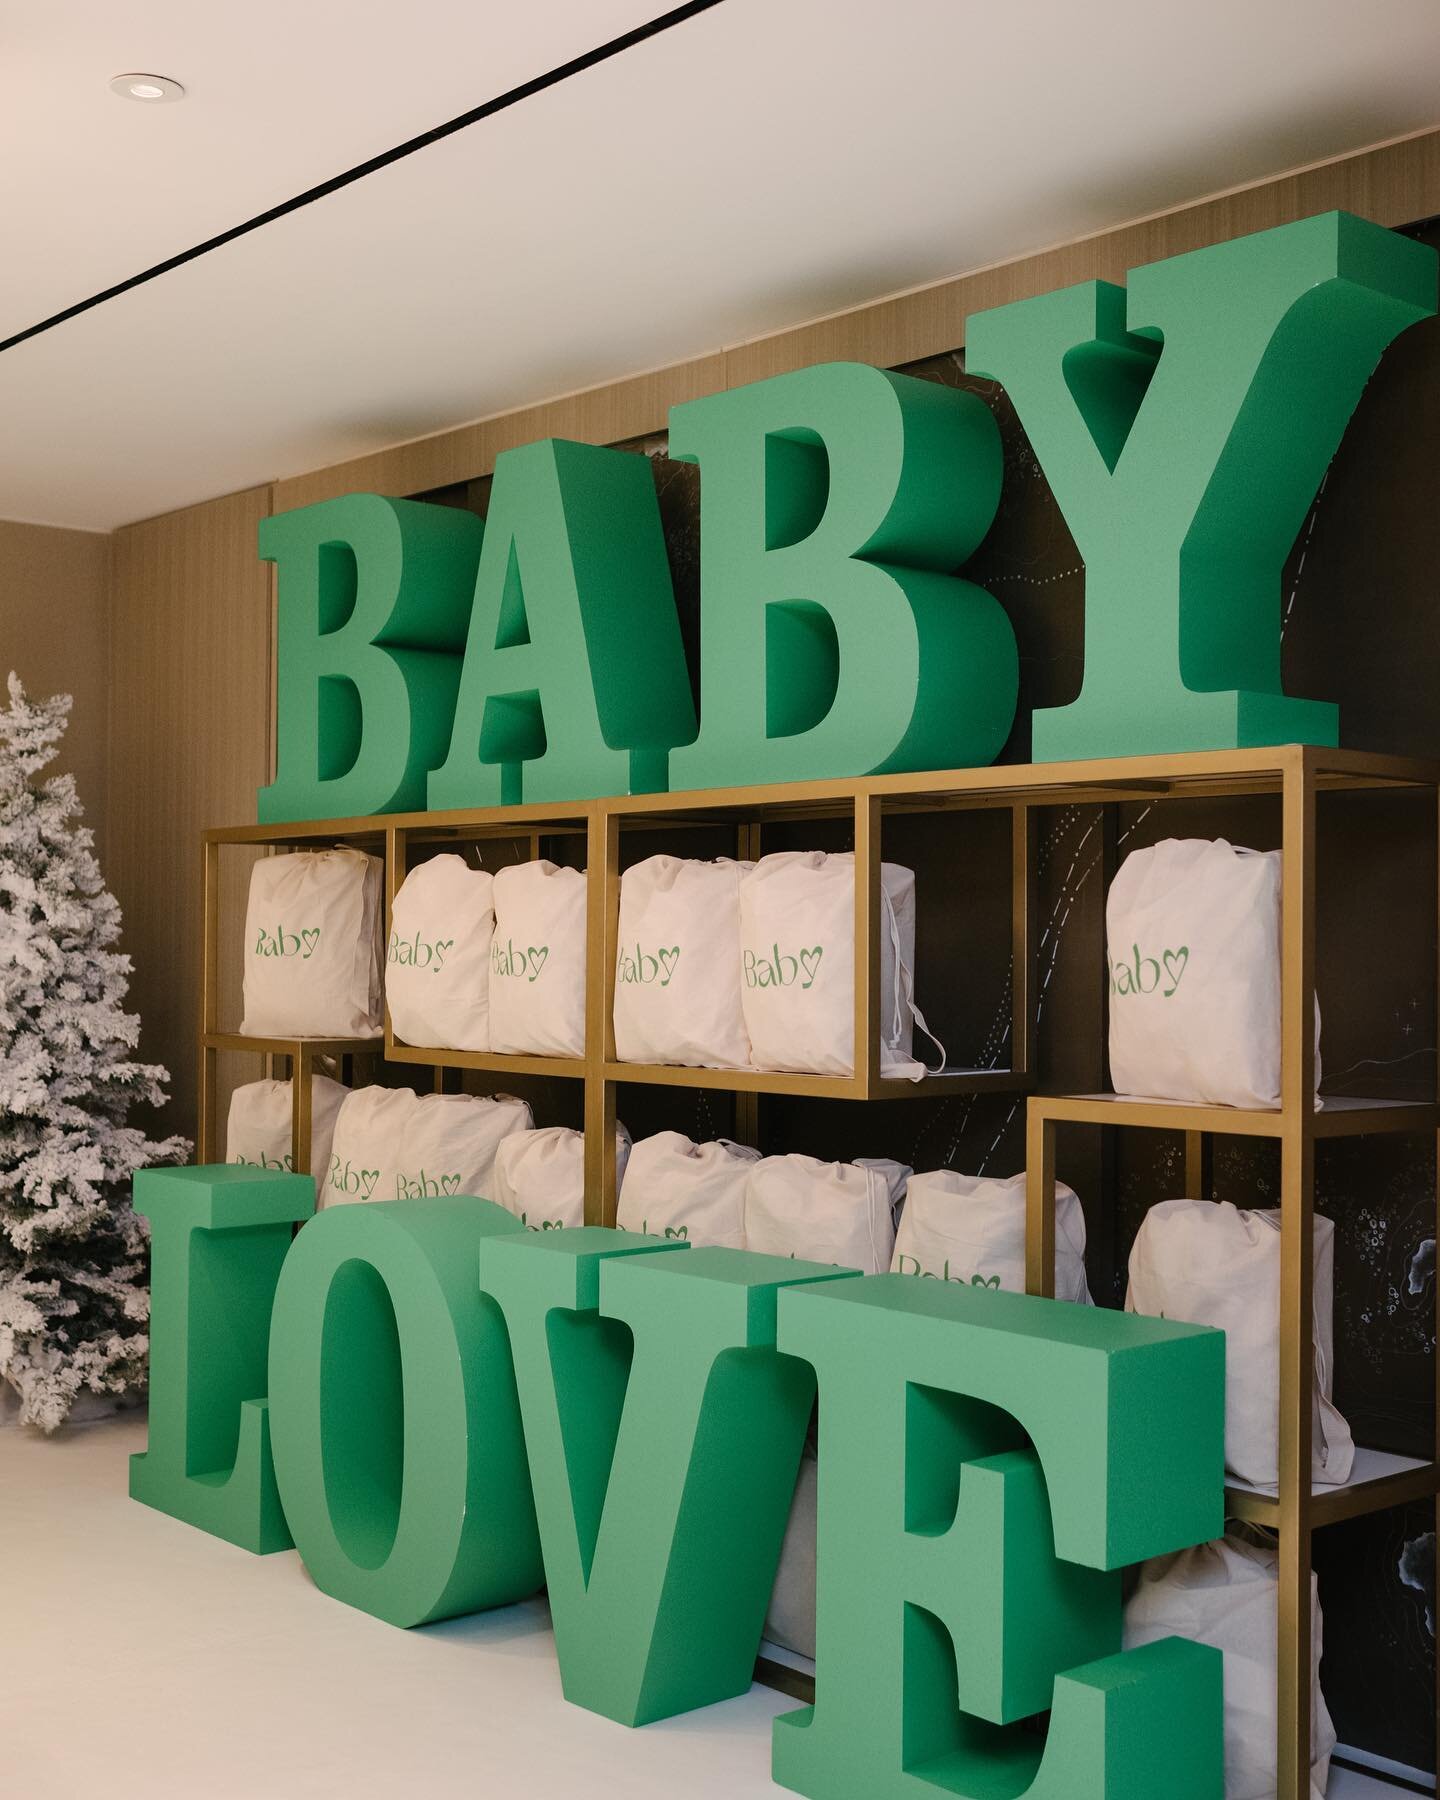 Loved transforming this room into a winter wonderland for @babylovebeginnings an incredible Toronto based charity providing diapers to families in Toronto.